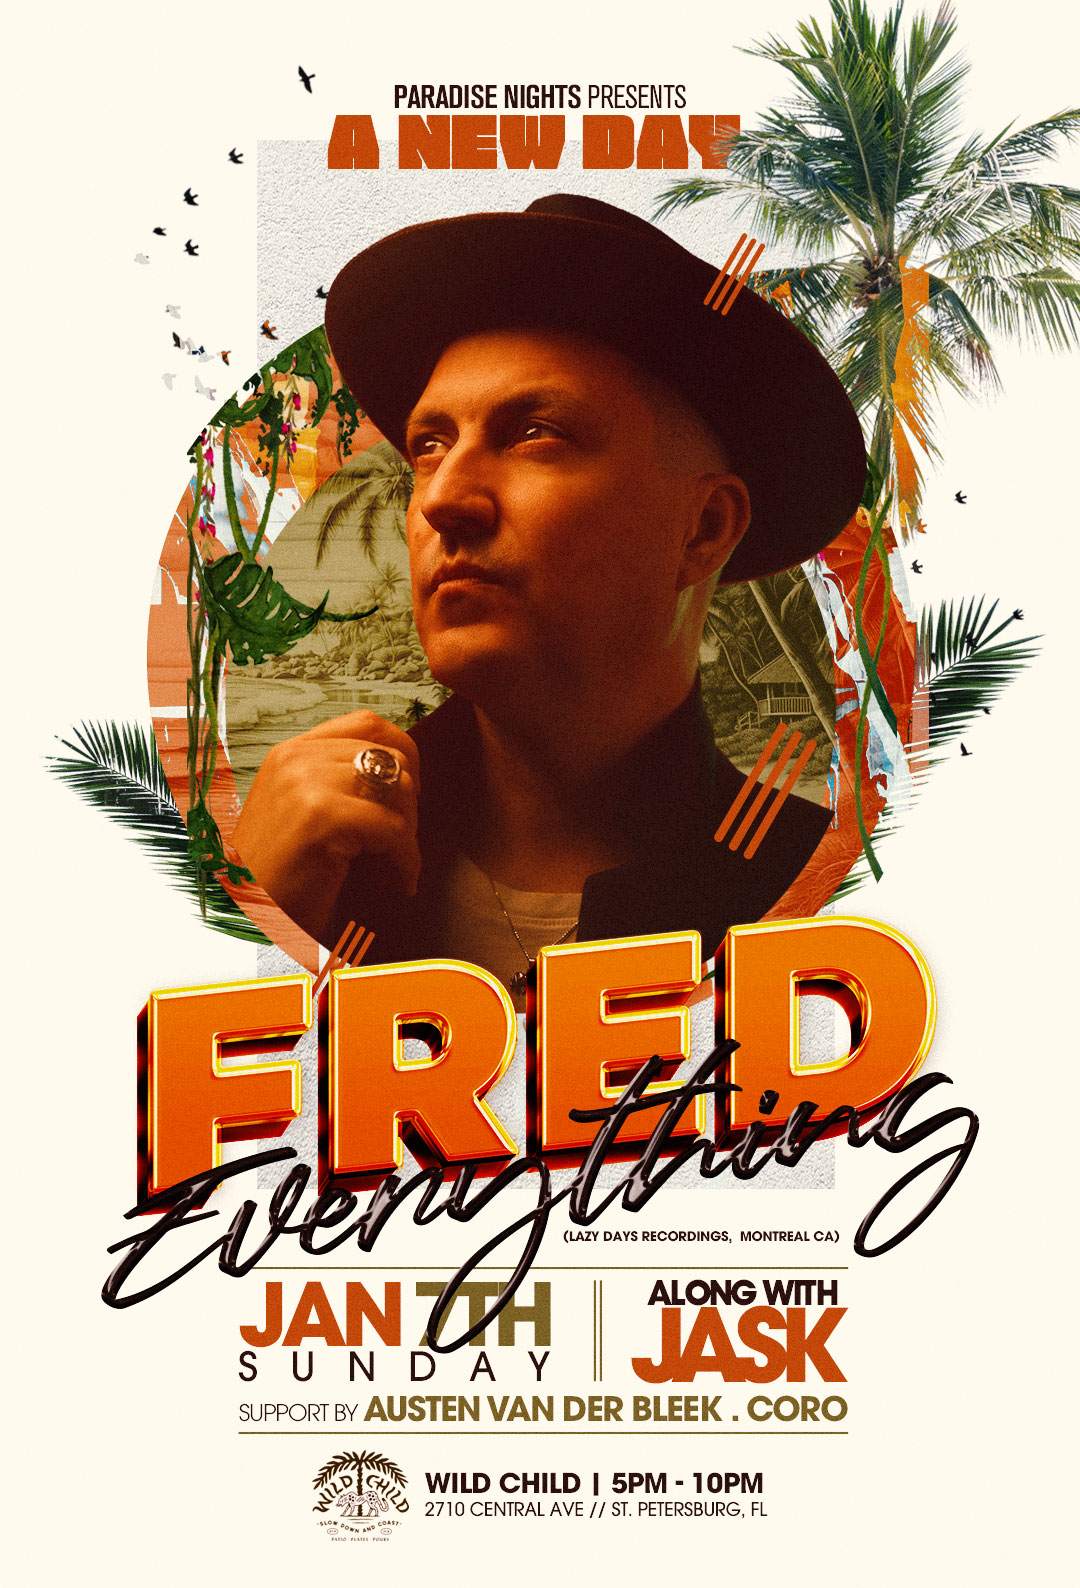 Paradise Nights presents A New Day with Fred Everything, Jask, Austen van der Bleek, & Coro - フライヤー表